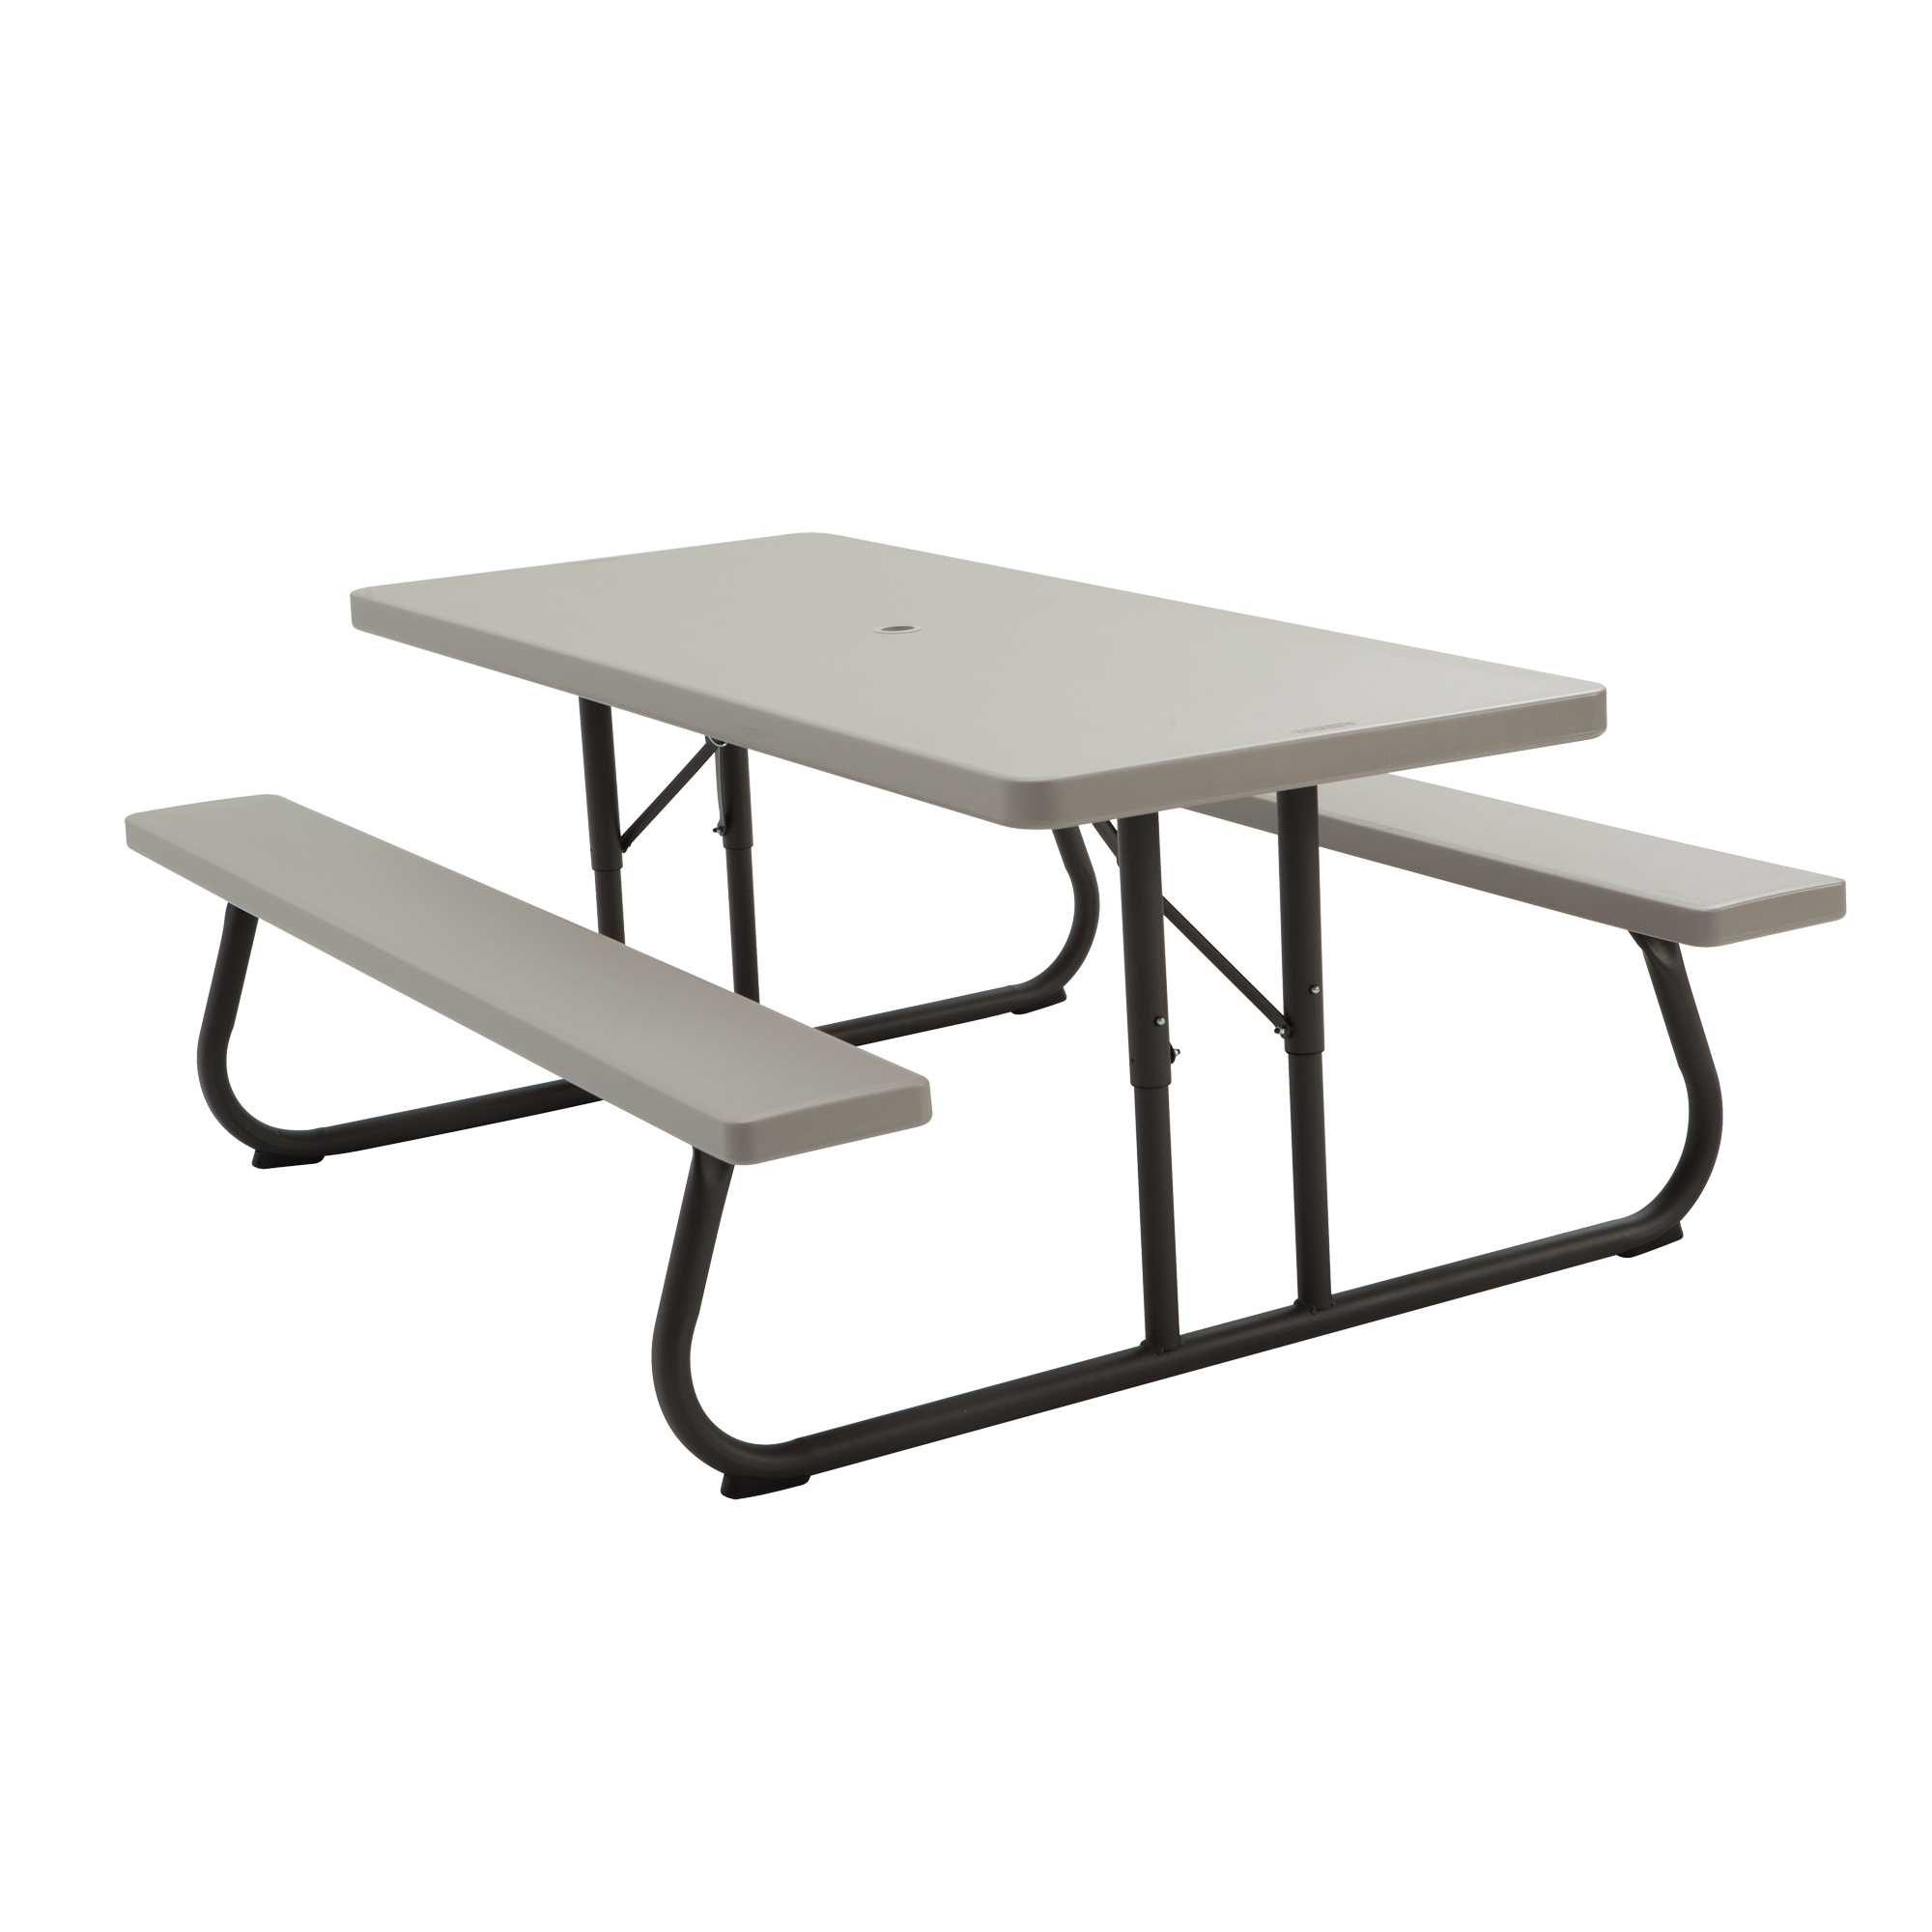 Lifetime 6 Foot Folding Picnic Table, Putty, 22119 - image 3 of 12